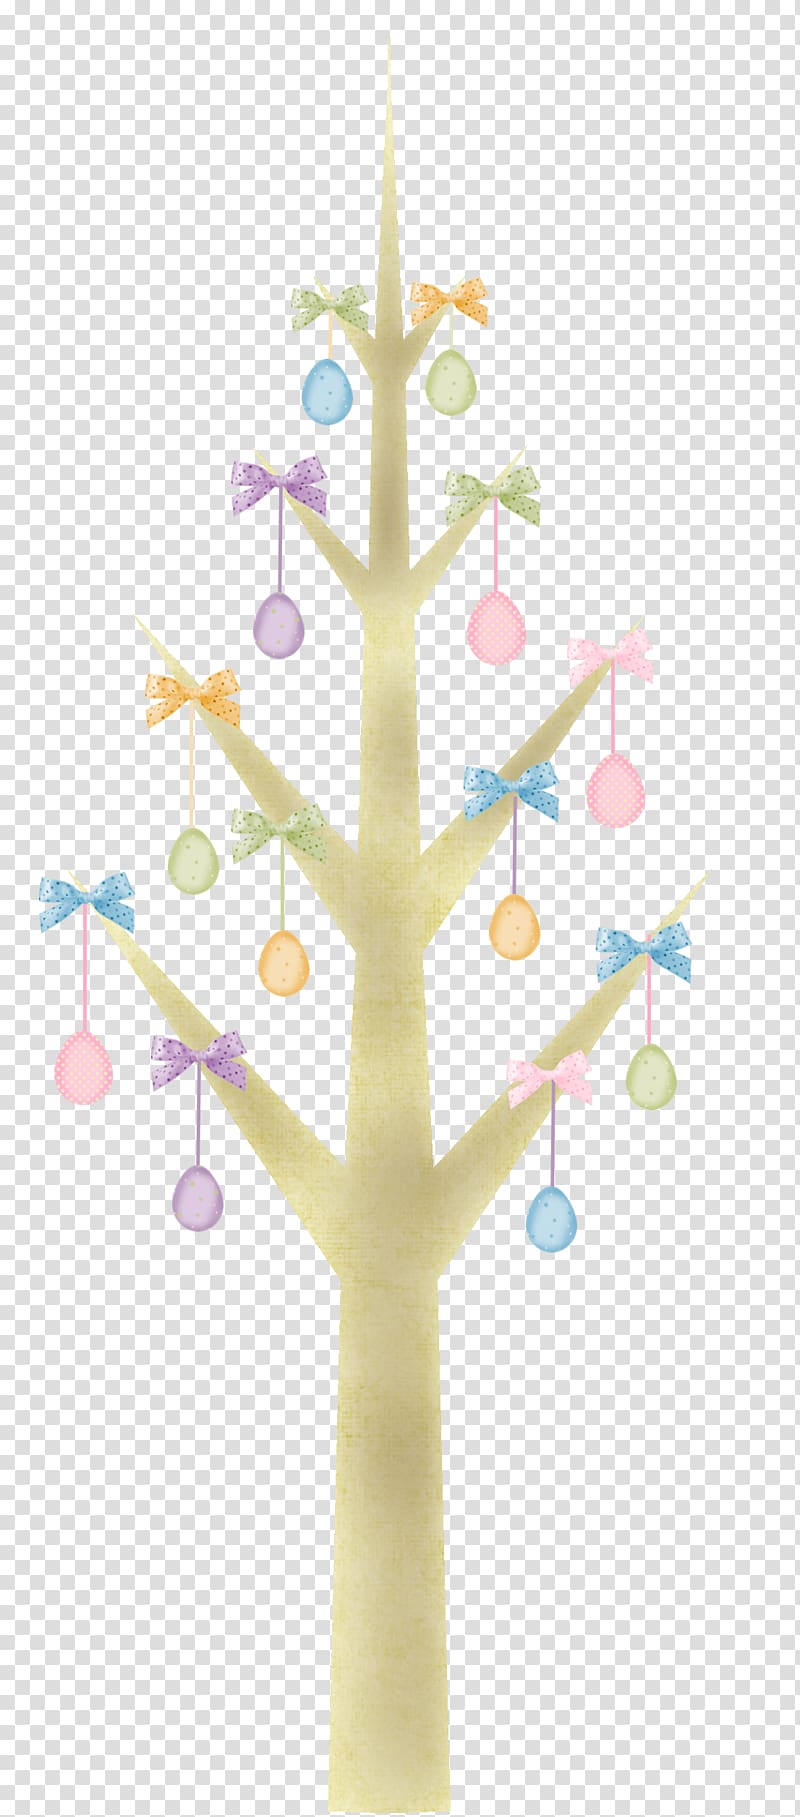 Christmas tree New Years Day Illustration, Creative Christmas tree transparent background PNG clipart